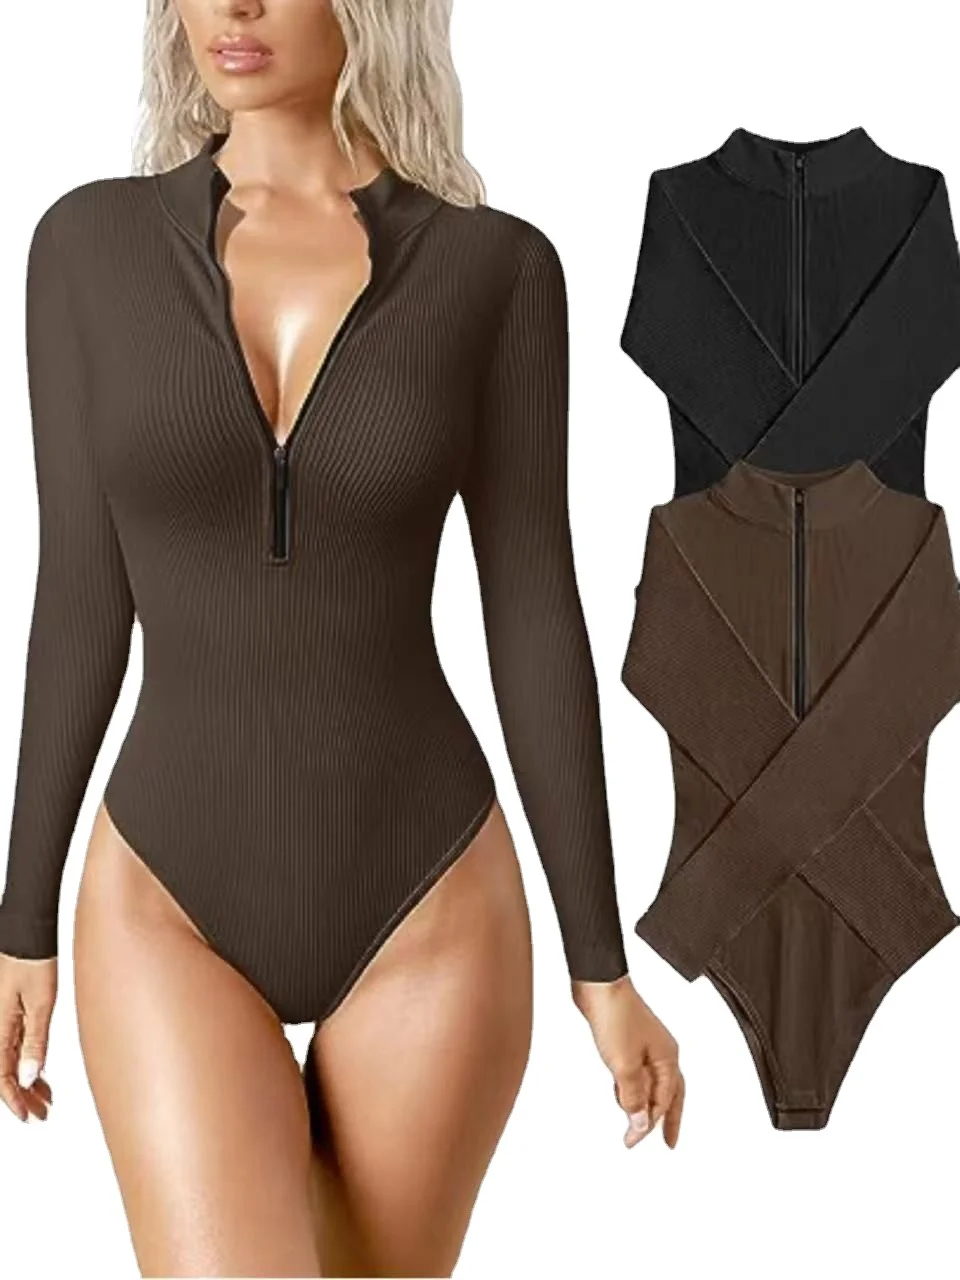 Women's Sport Jumpsuit Ribbed Tight Body Suits Sexy Outfit Fitness Workout Yoga Long Sleeve Bodysuit Zipper One Piece Bodysuit women jumpsuit solid color skinny playsuit women long sleeve sheer patchwork waist tight belt overall for party robe